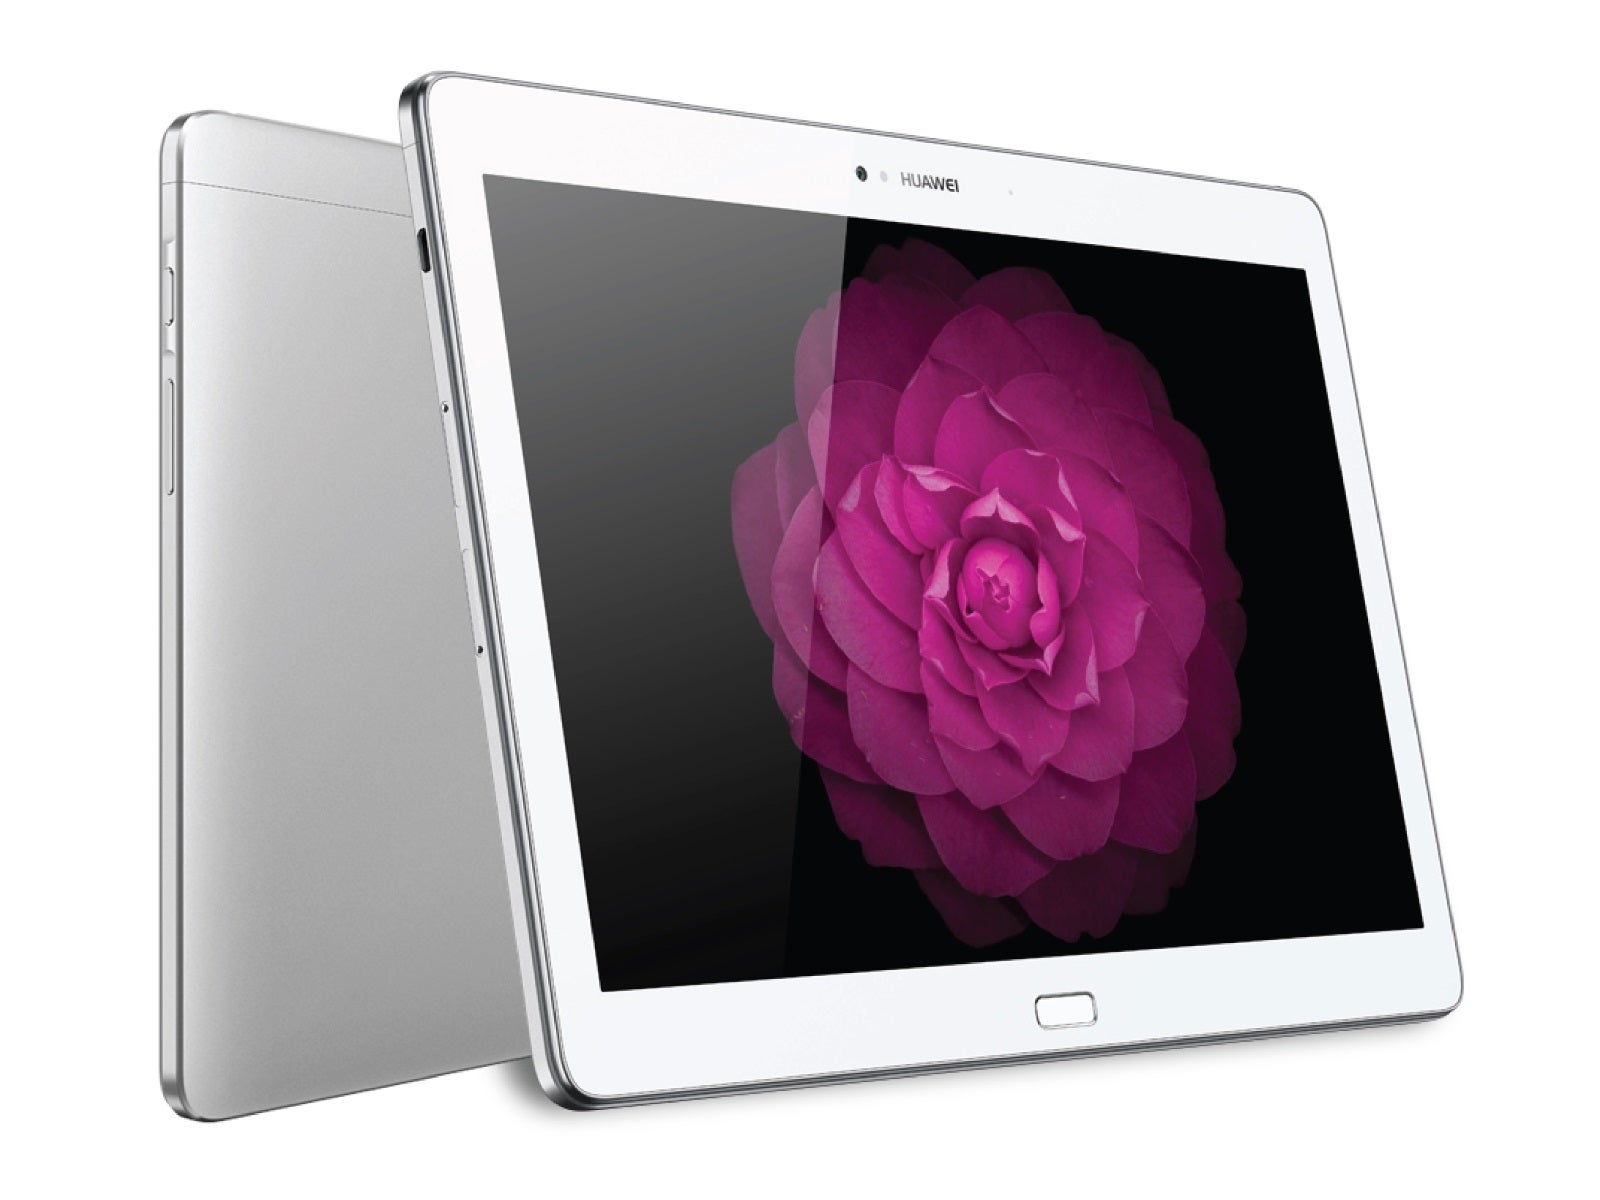 Huawei announces the 10-inch MediaPad M2 tablet with active stylus support